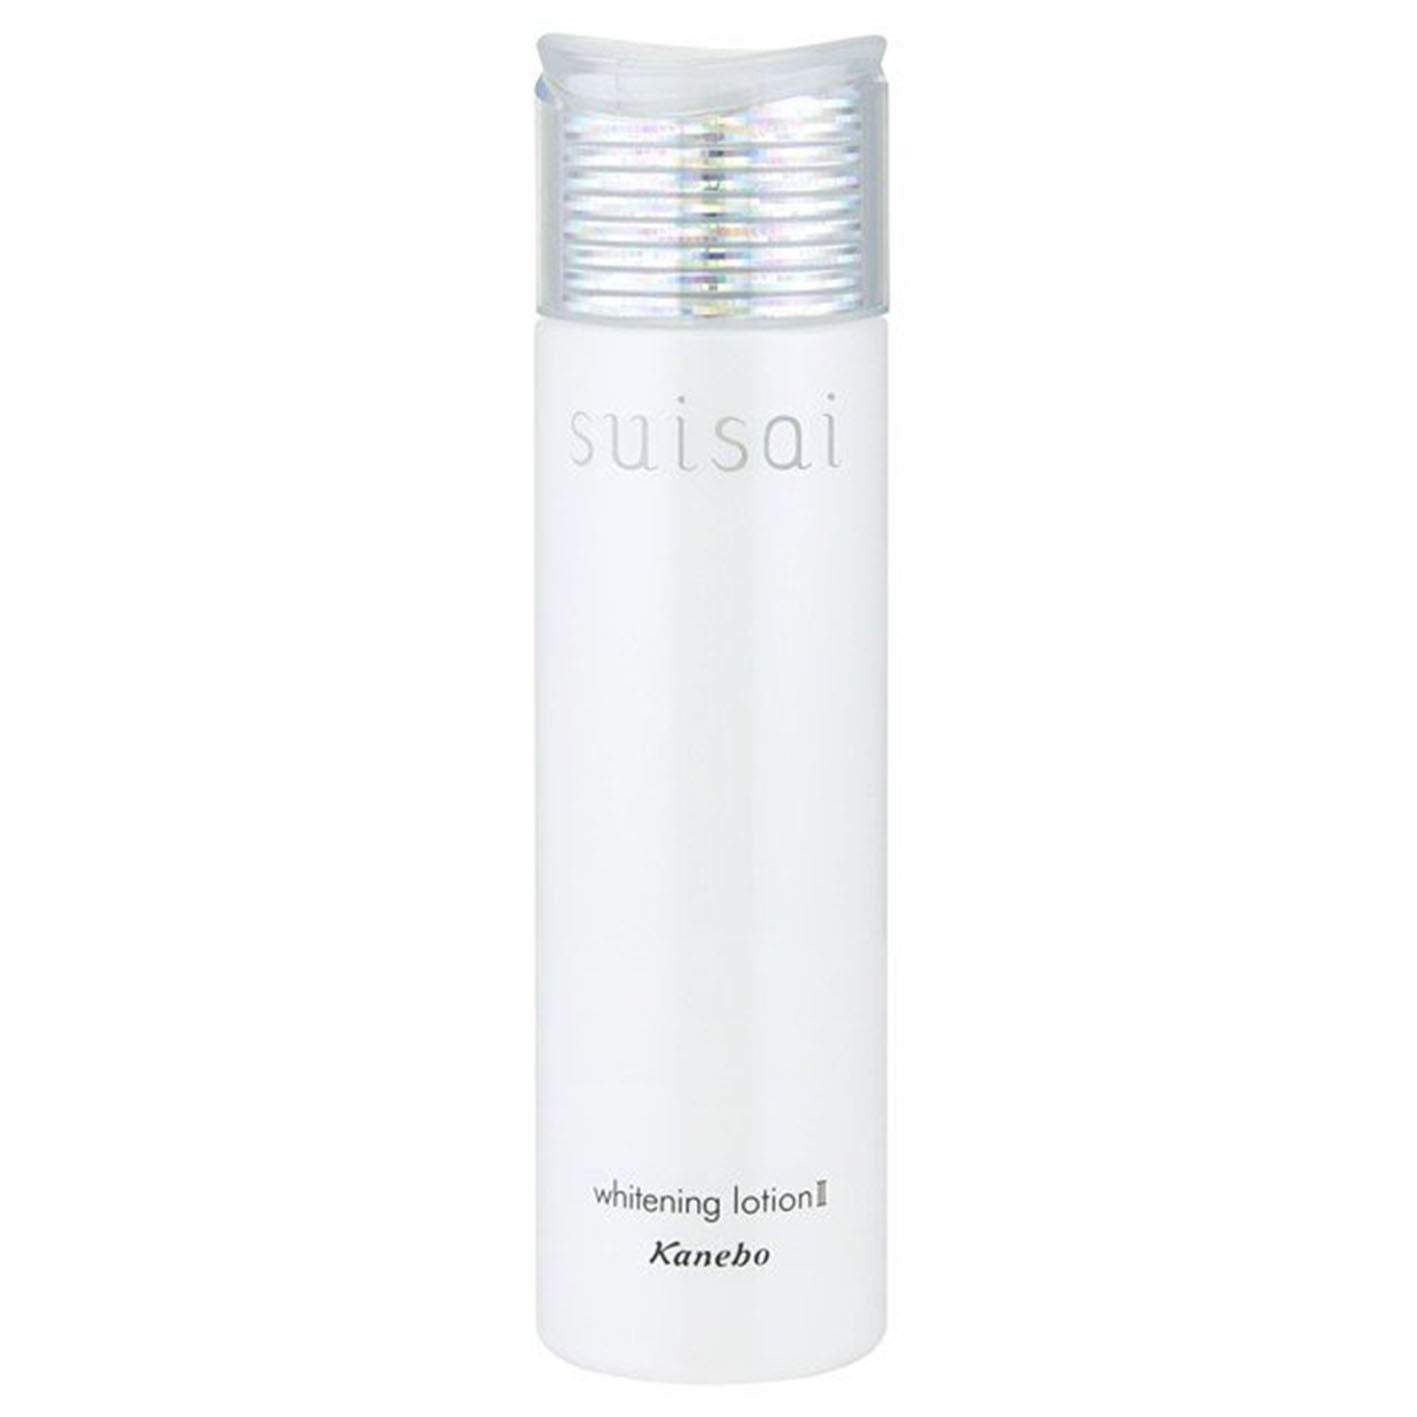 Kanebo Suisai Whitening Lotion 150ml - Moist - Harajuku Culture Japan - Japanease Products Store Beauty and Stationery